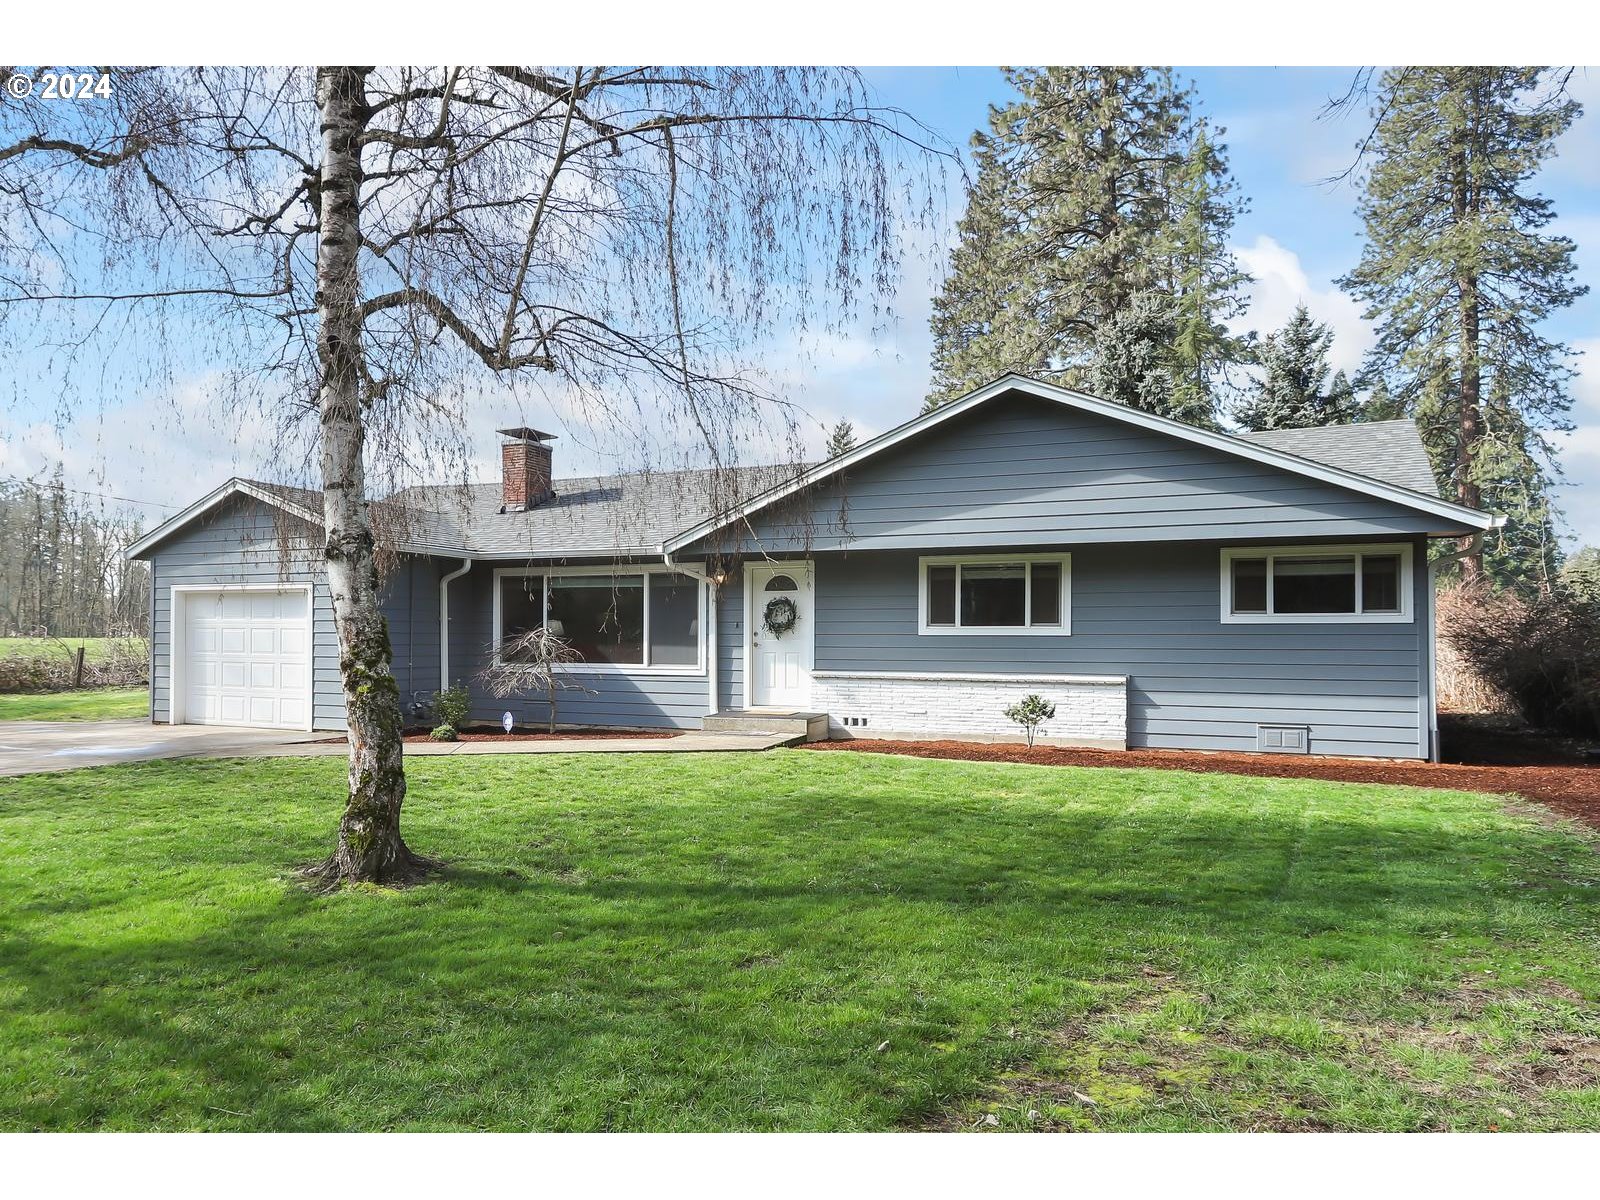 26515 S RANCH HILLS RD, Mulino, OR 